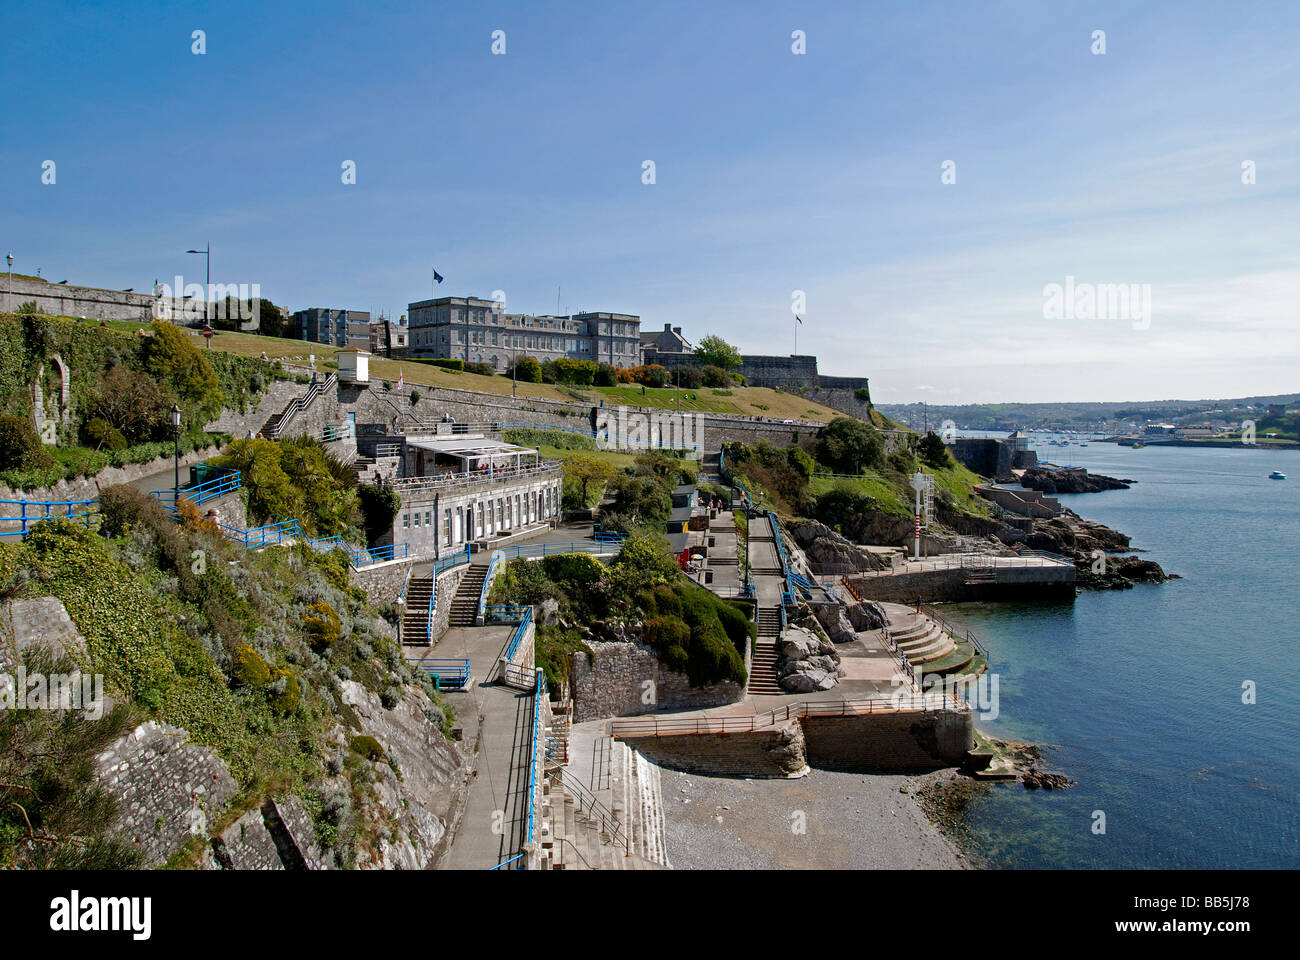 the seafront at plymouth in devon, uk Stock Photo